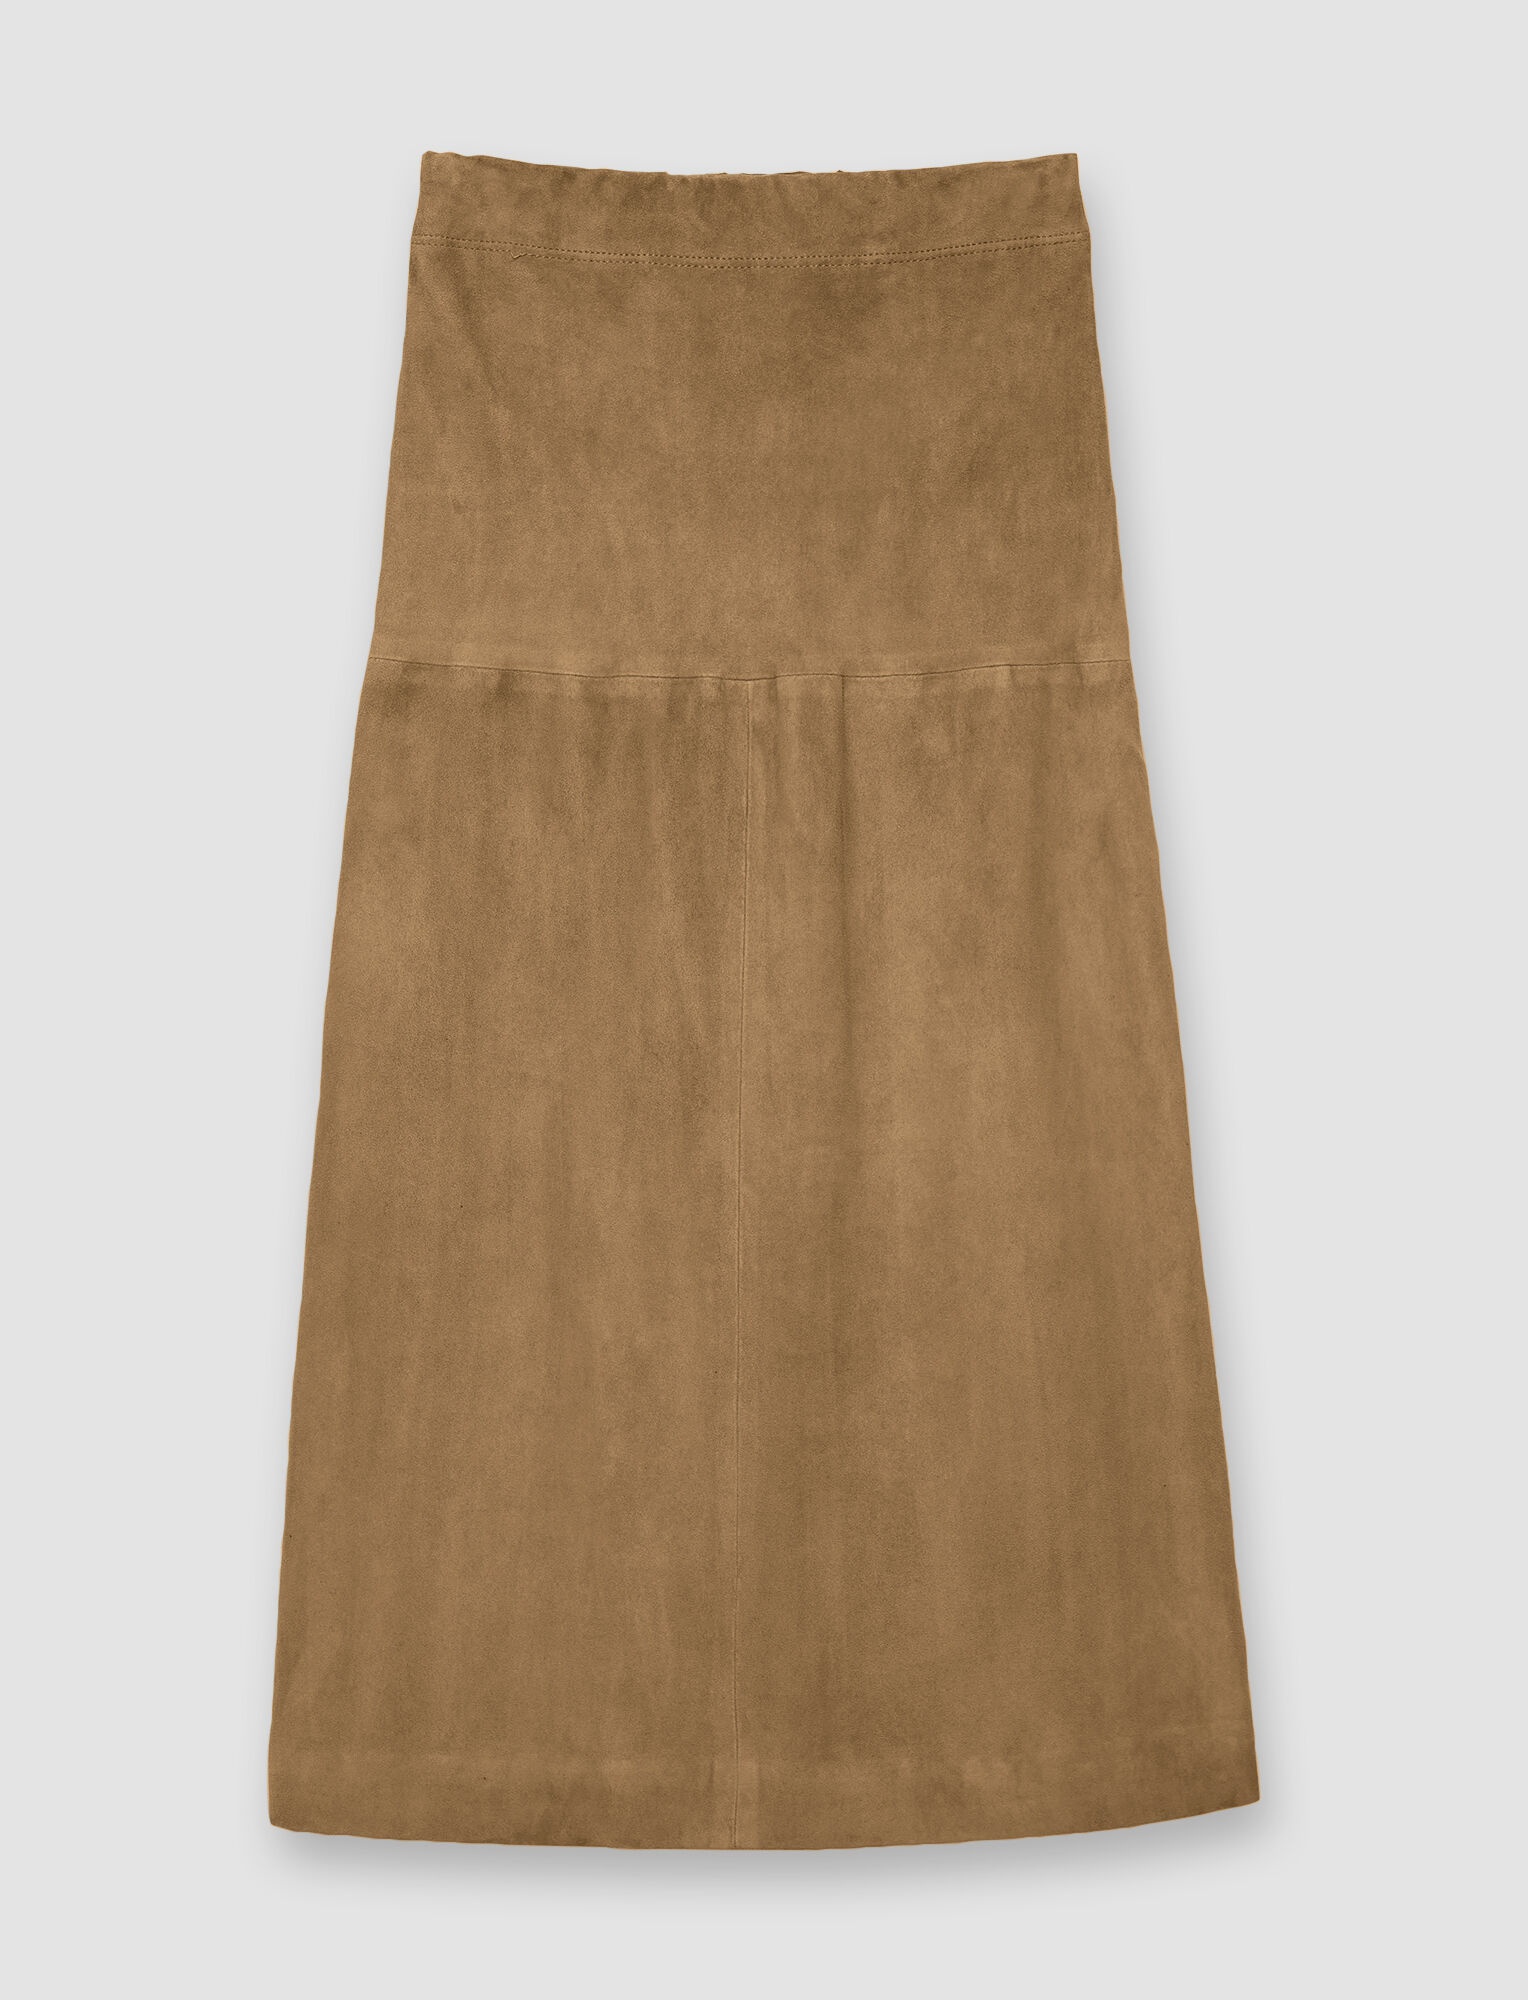 Joseph Suede Stretch Sacha Skirt In Hickory